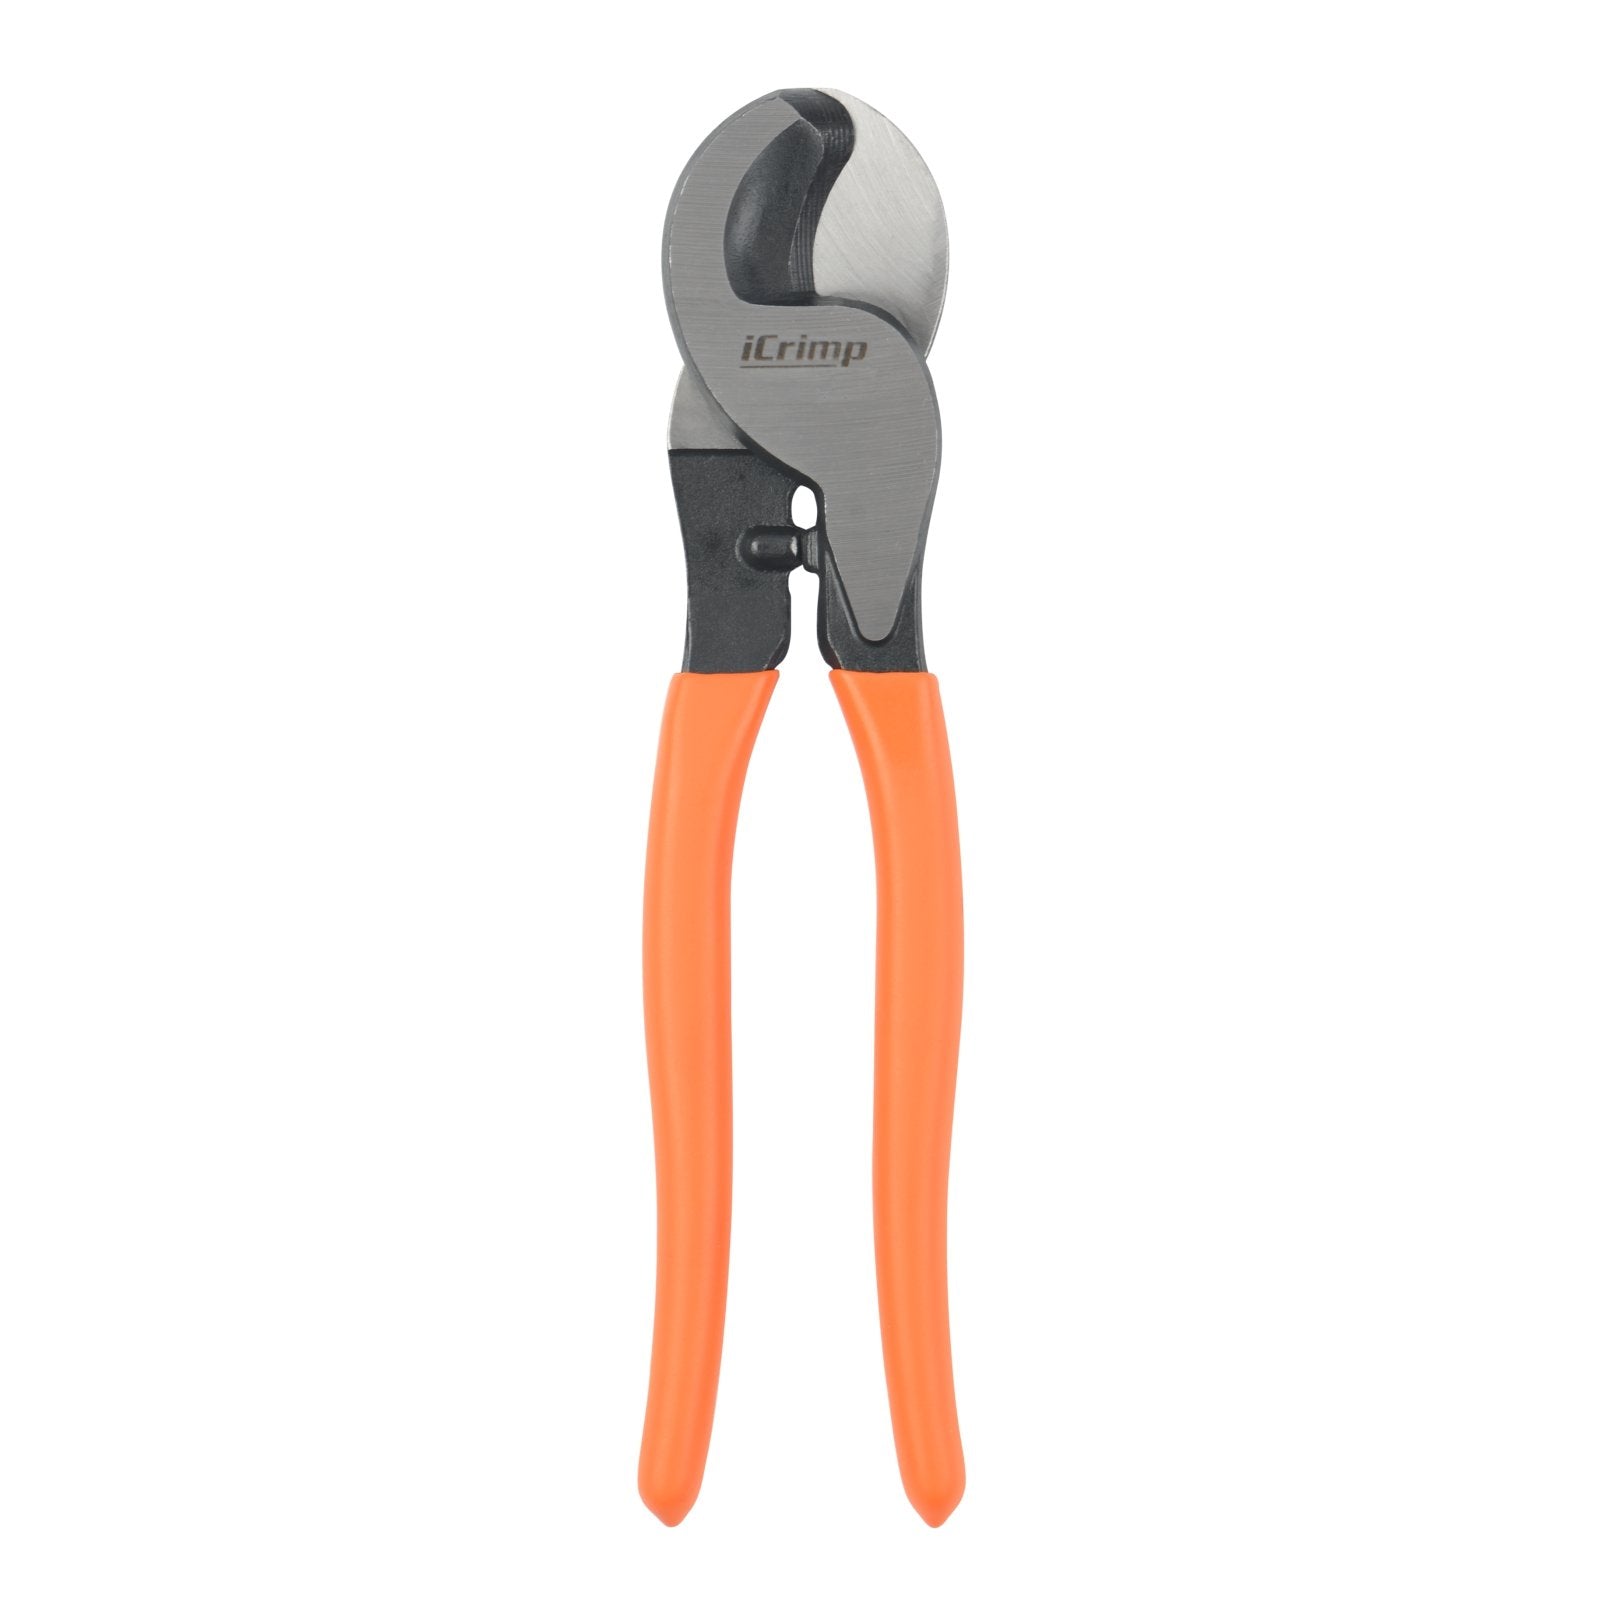 Wire Cutter, Shear Cut, Electrician's Cable Cutting Pliers — IWISS